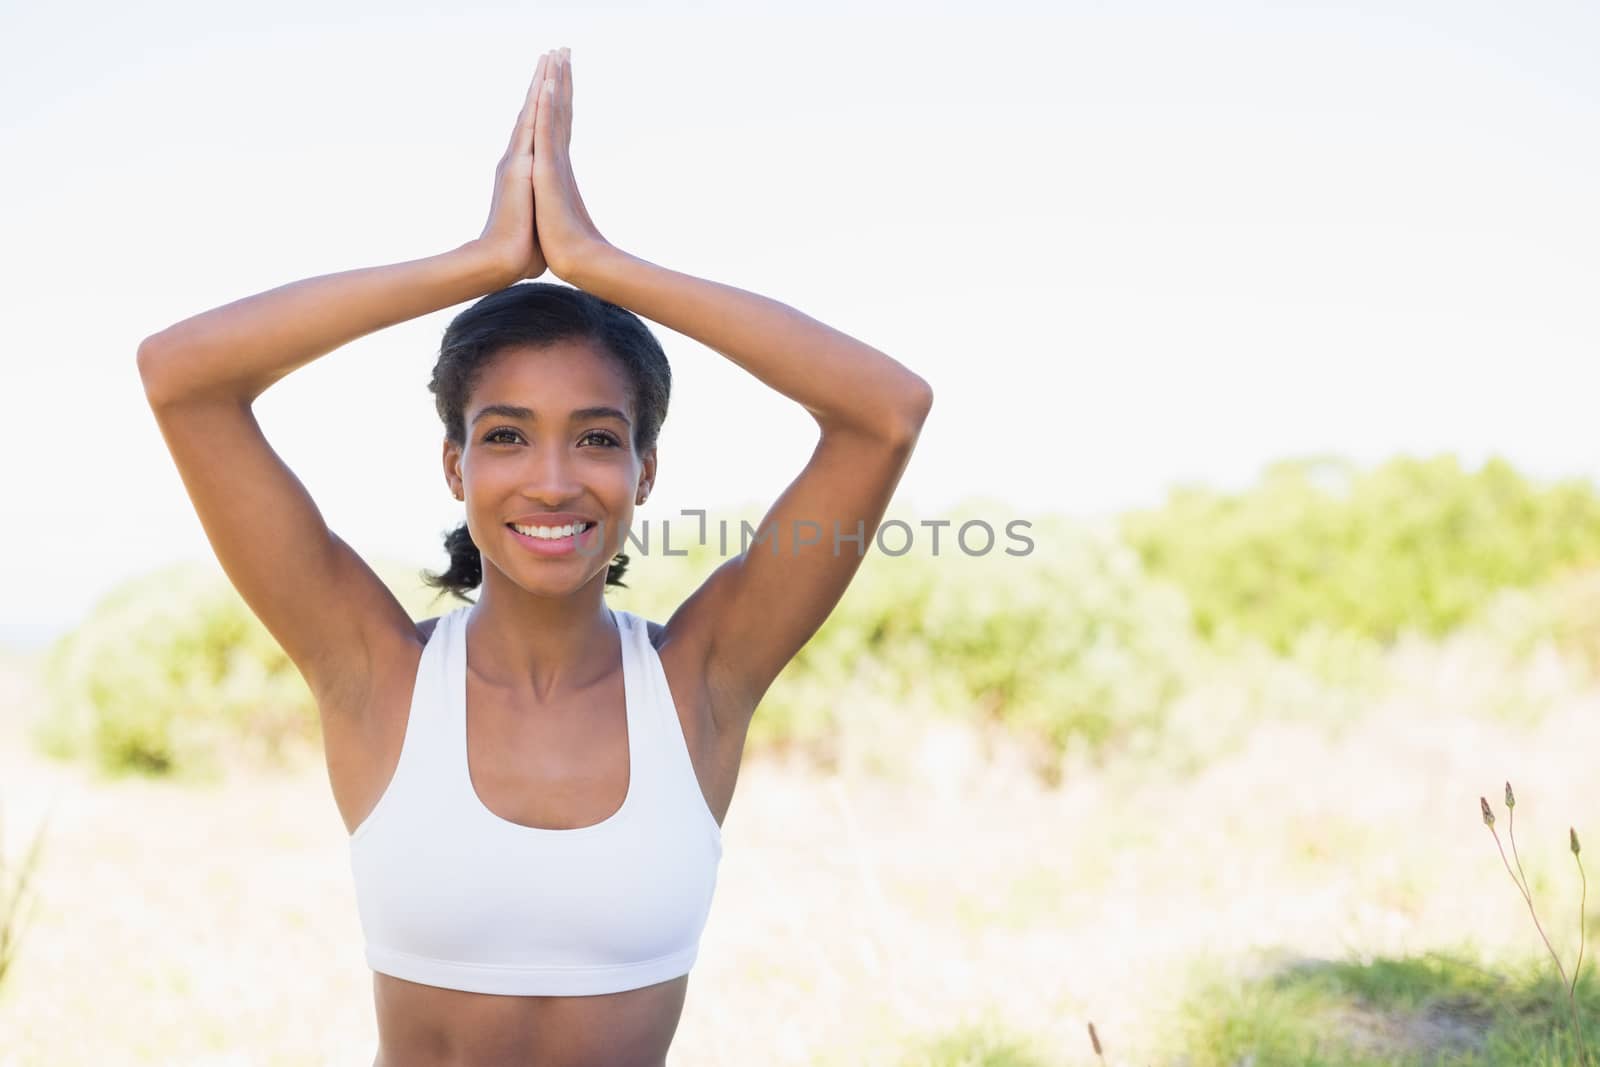 Fit woman sitting on grass in lotus pose smiling at camera by Wavebreakmedia